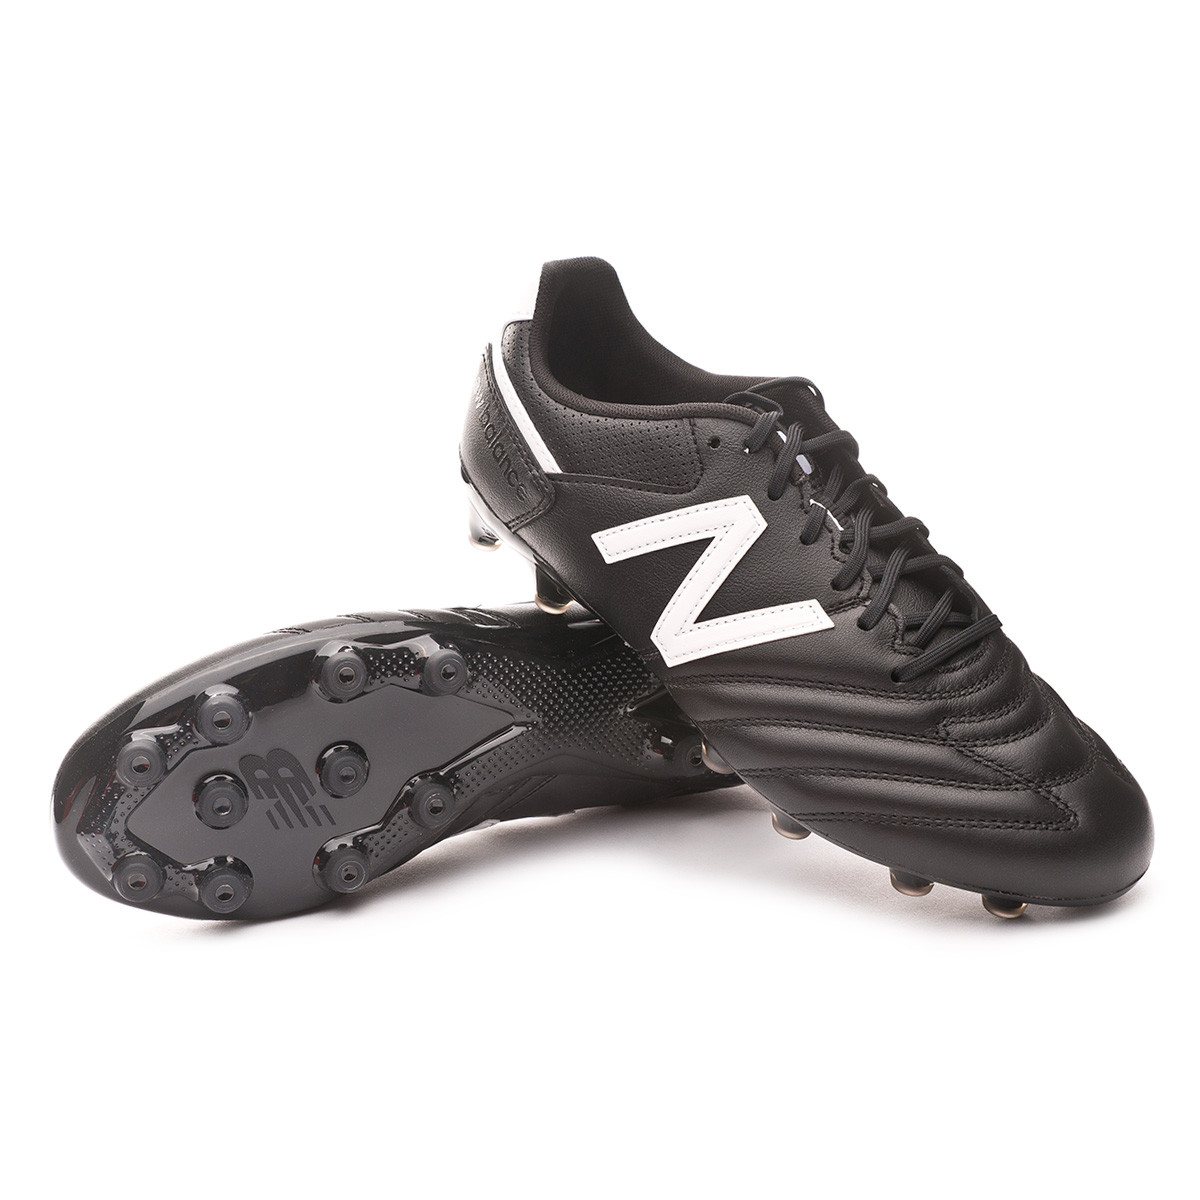 black and white new balance football boots